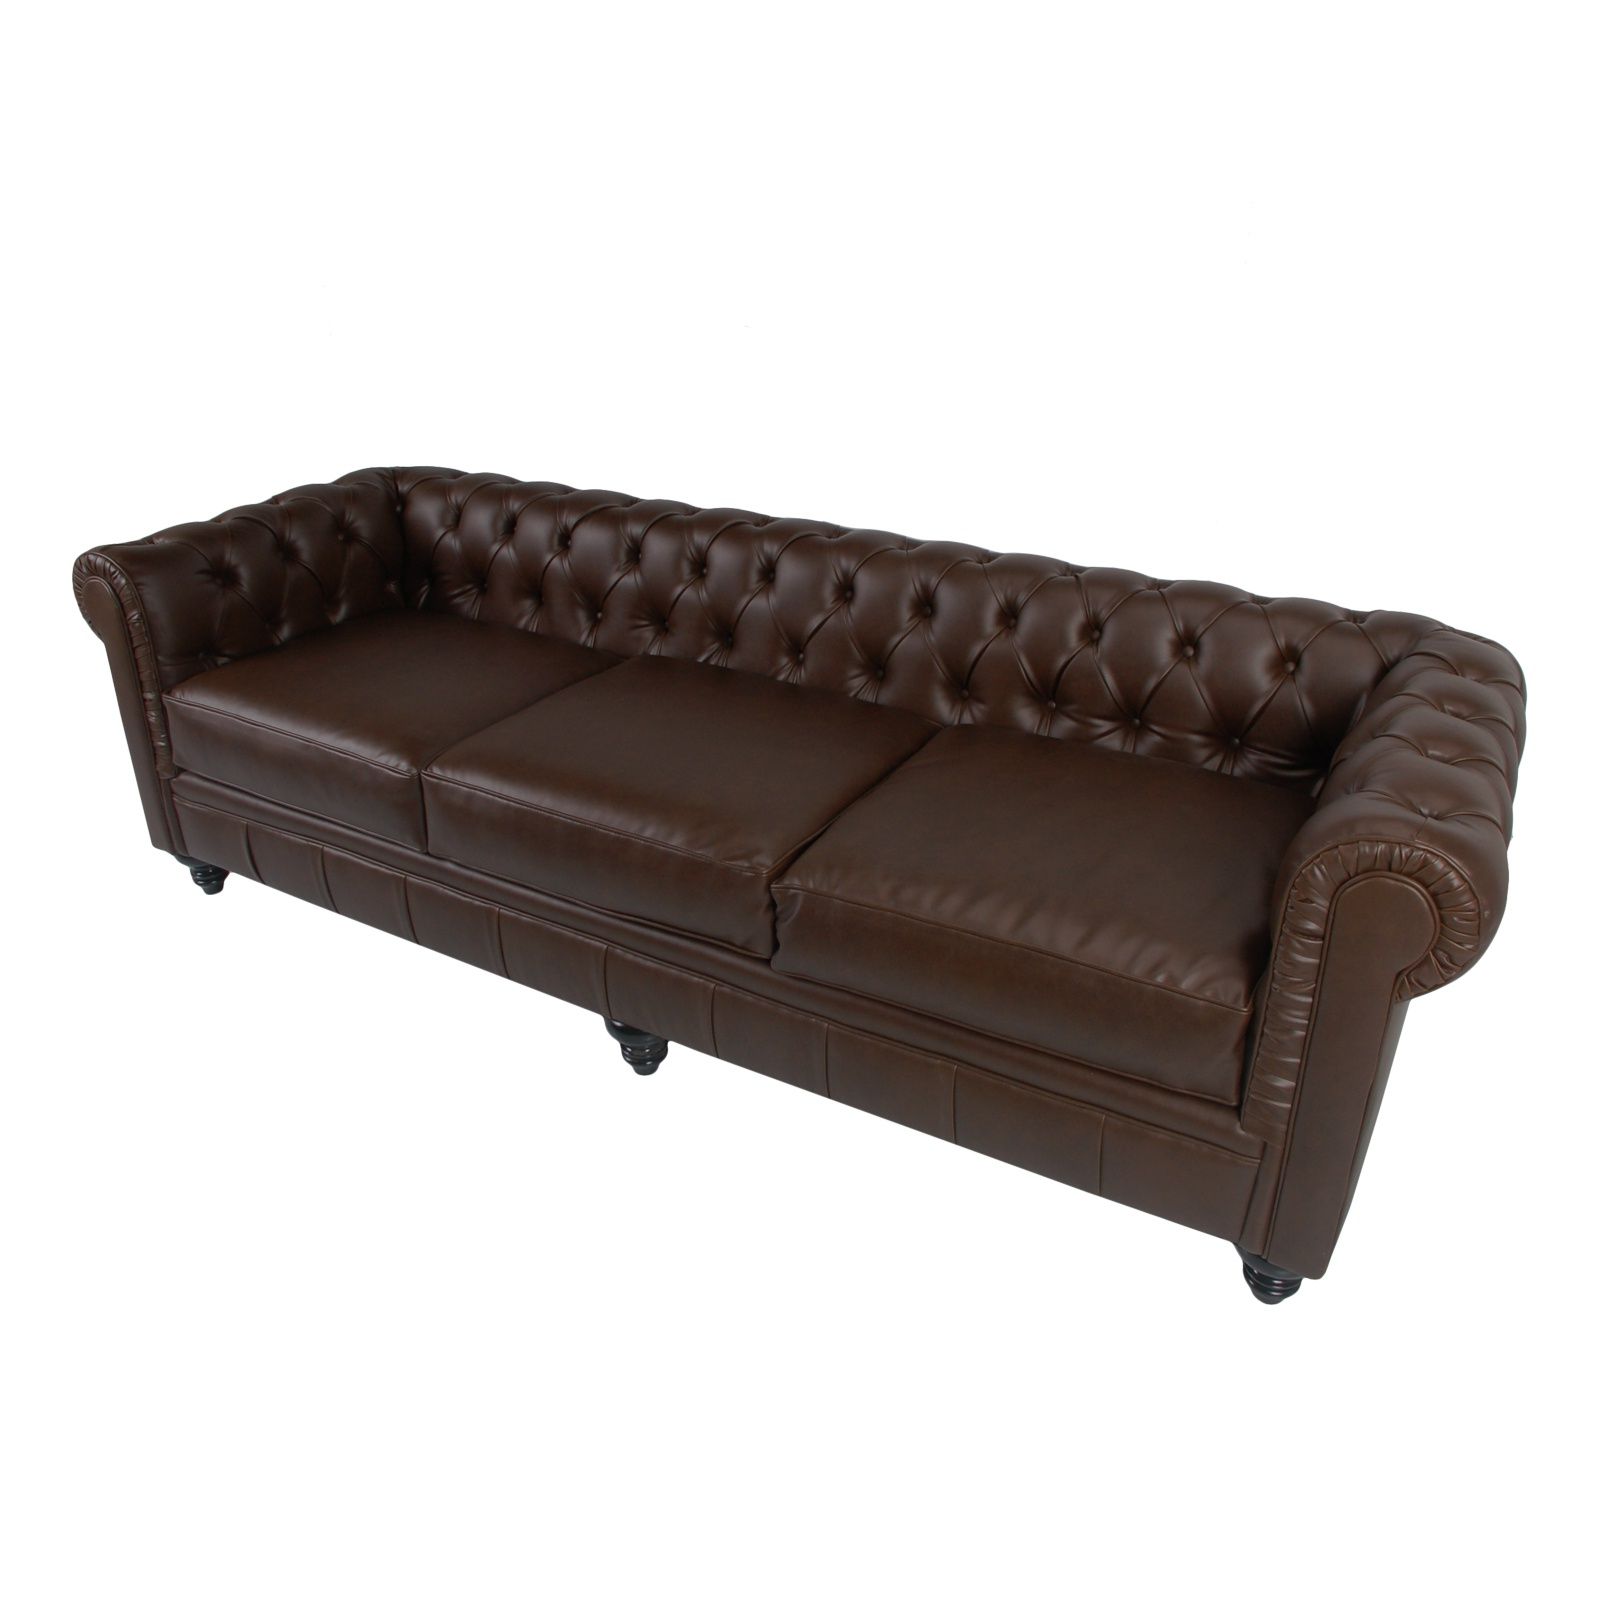 Chesterfield Sofa 95 (chocolate Brown) – Formdecor Within Sofas In Chocolate Brown (View 11 of 20)